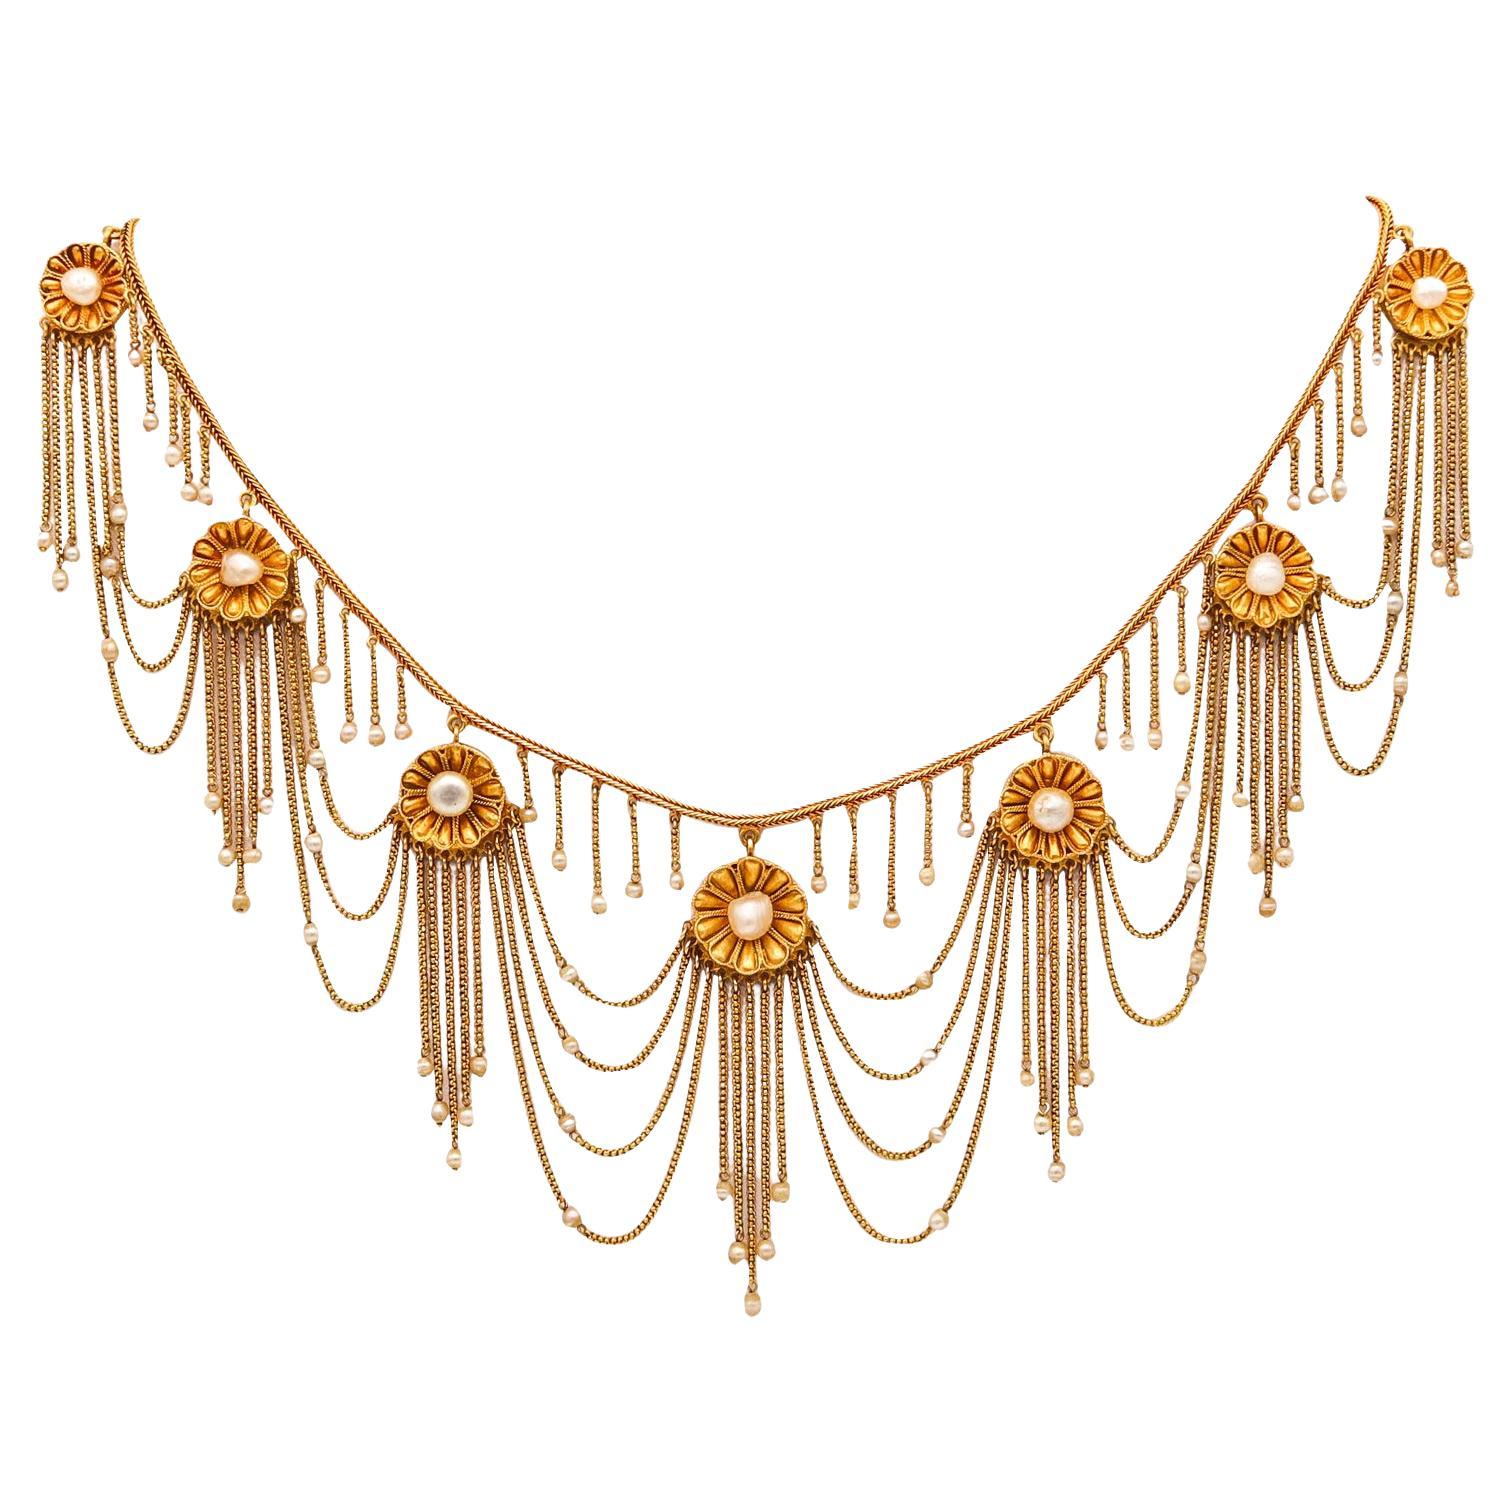 Victorian 1870 Gorgeous Festoon Fringe Necklace 18Kt Yellow Gold Natural Pearls For Sale